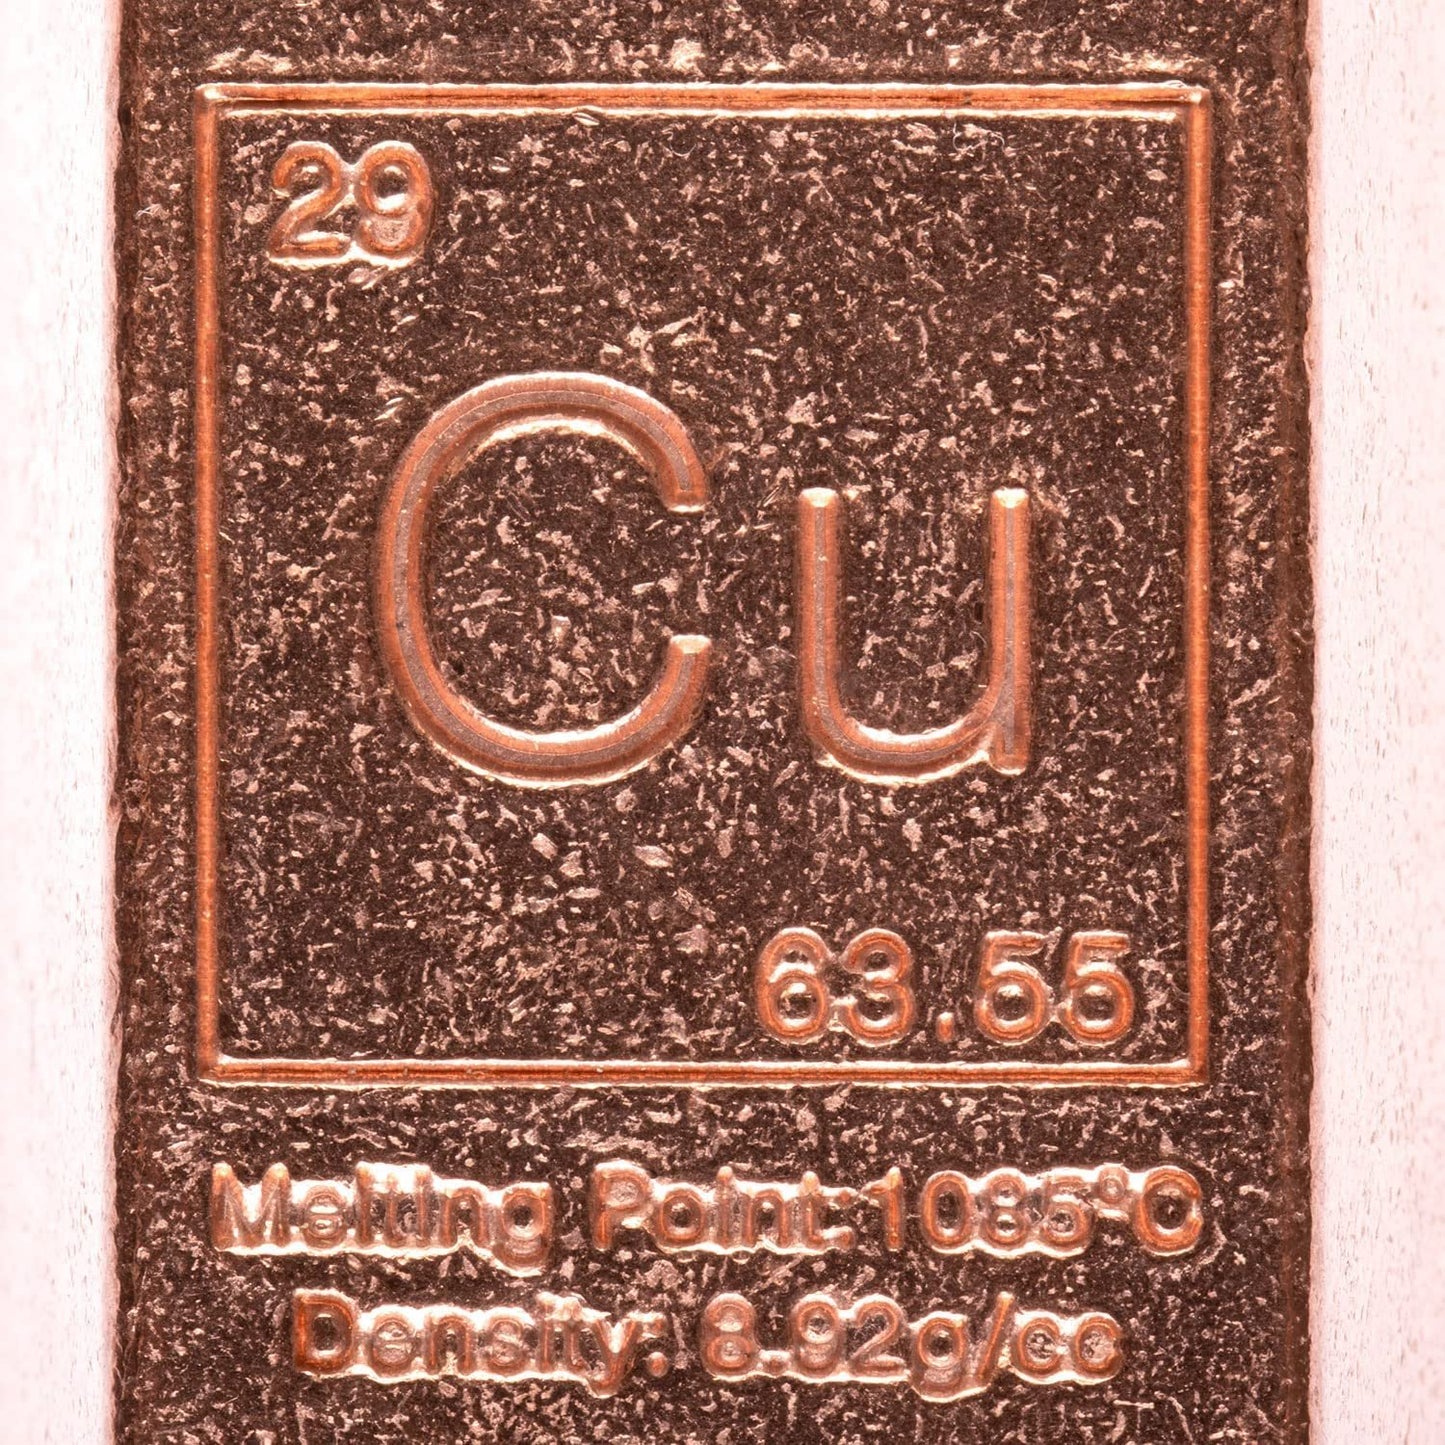 1 Pound Copper Bullion Bar Ingot Paperweight - 999 Pure Chemistry Element Design with Certificate of Authenticity